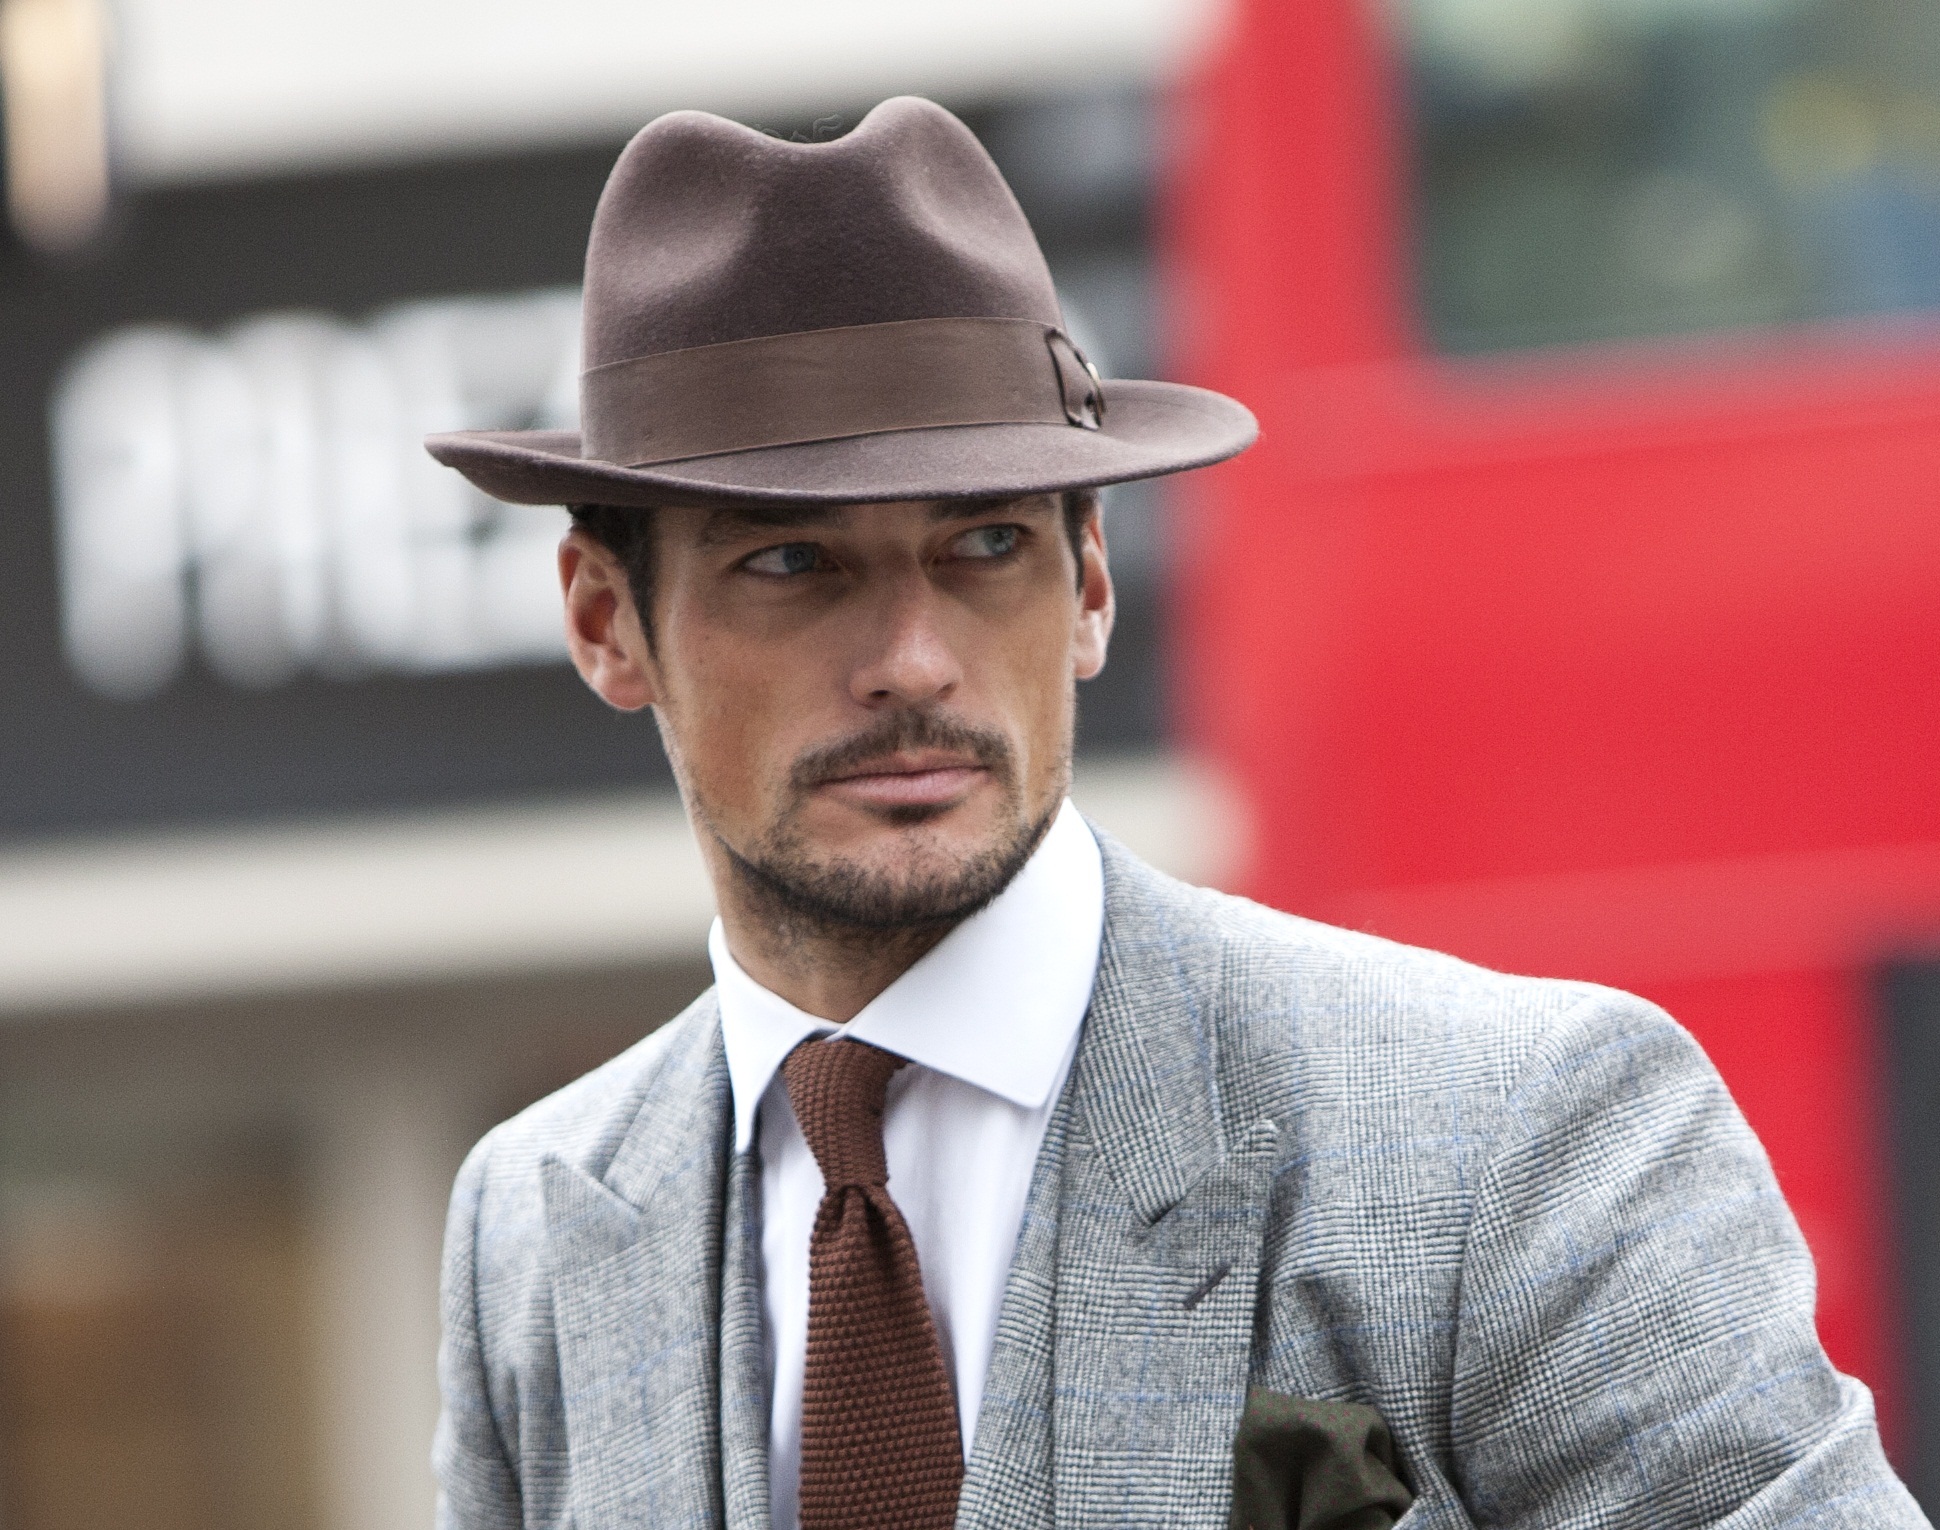  - david_gandy_by_conor_clinch_2013_-_cropped